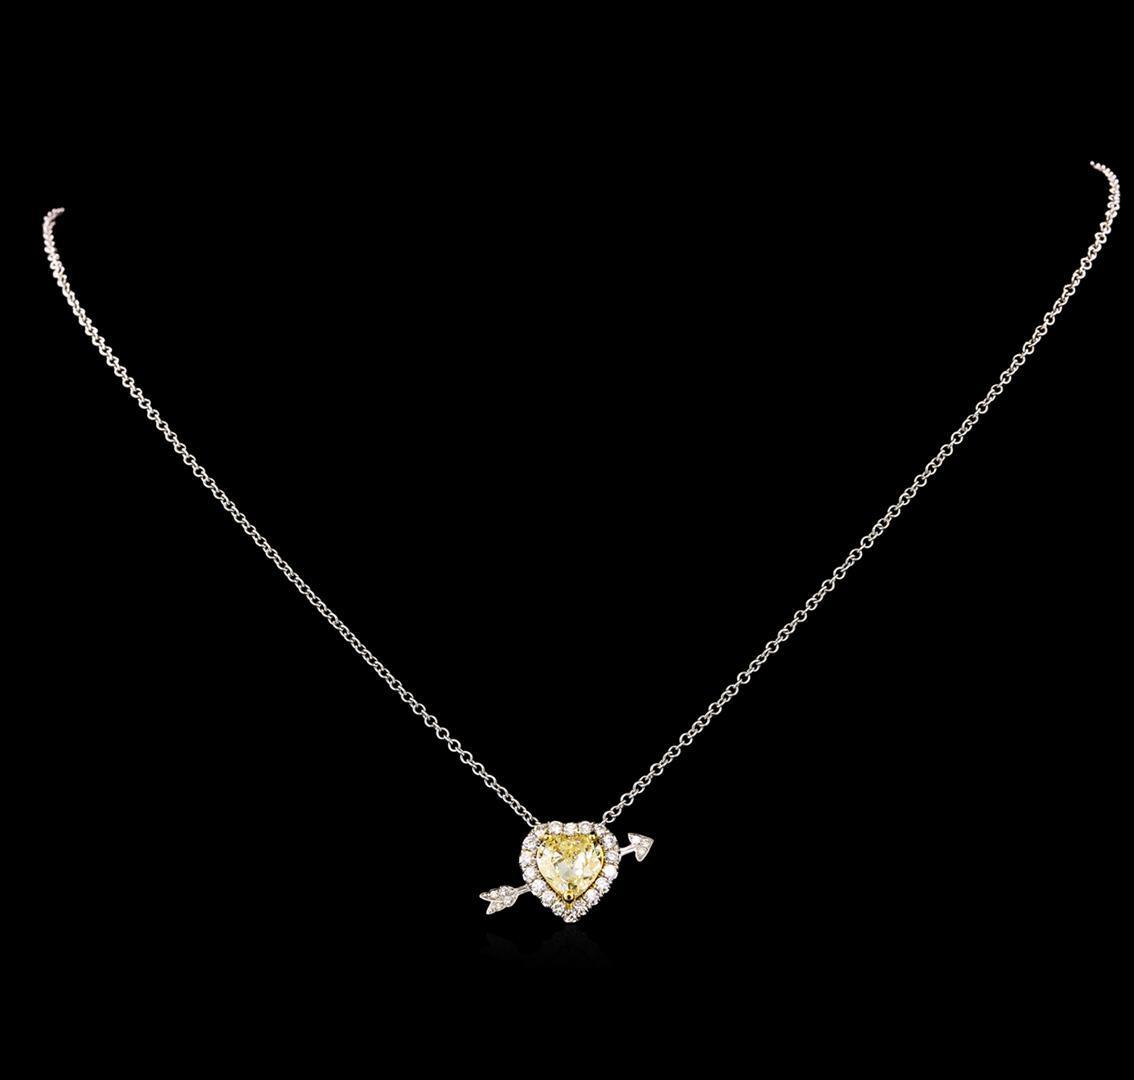 18KT Two-Tone Gold 2.25 ctw Diamond Pendant With Chain